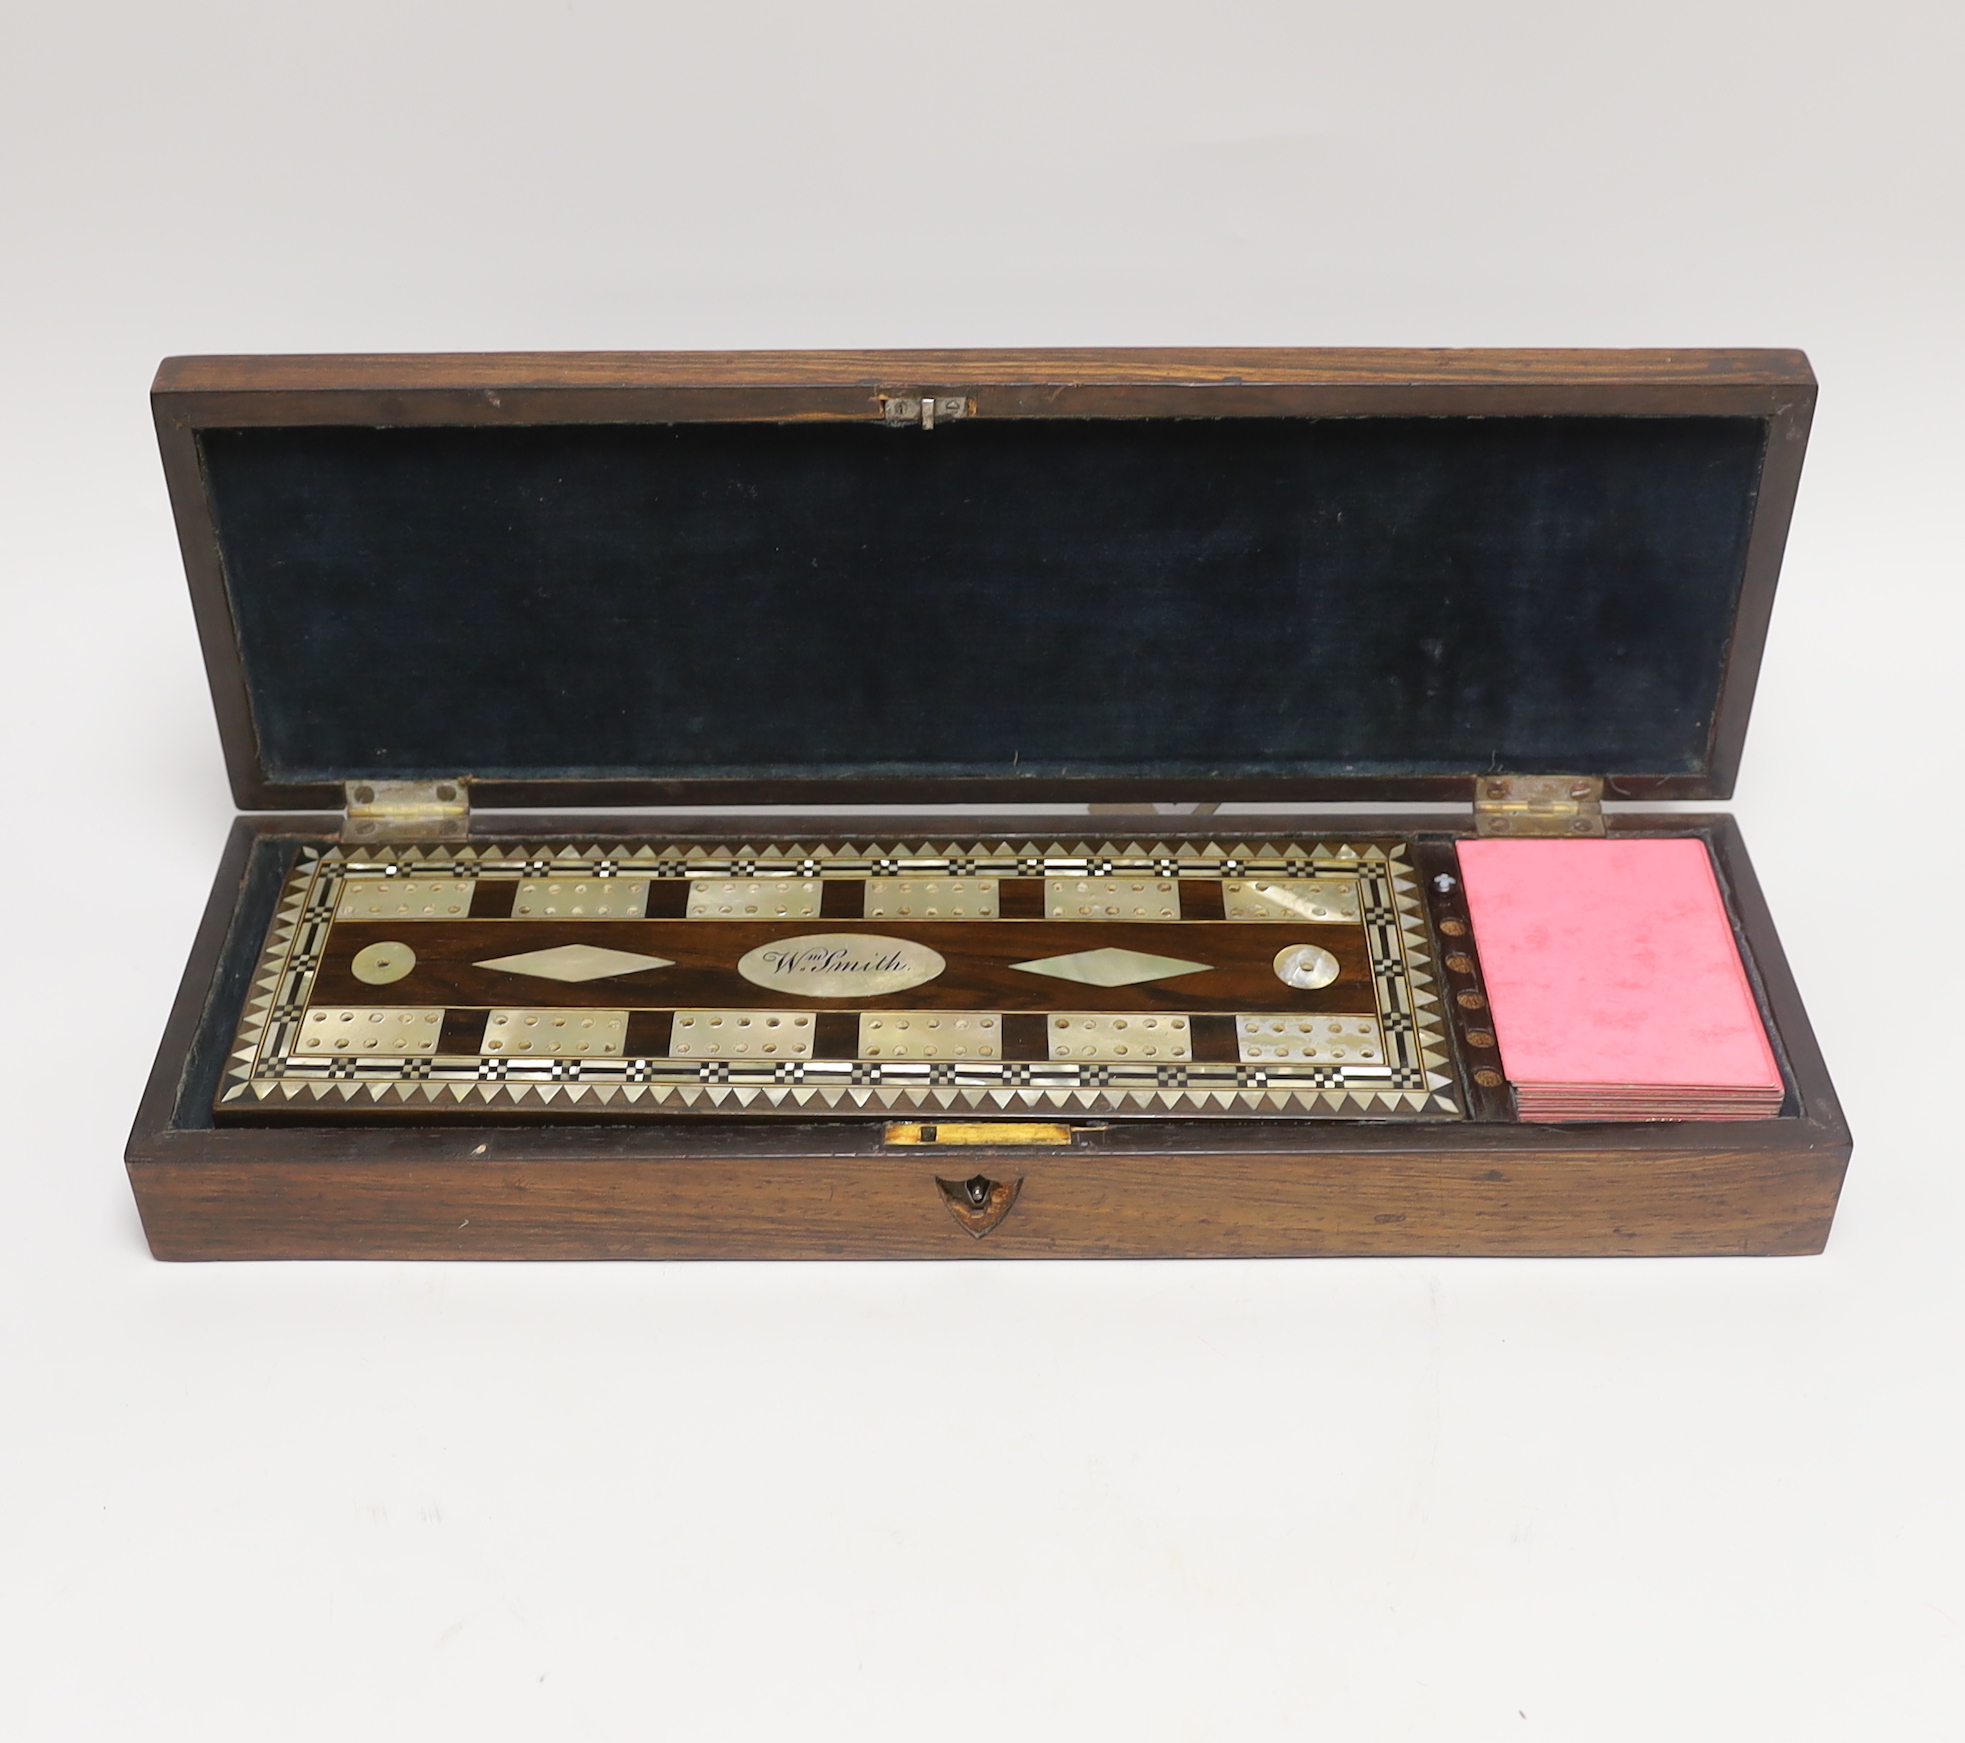 A mother of pearl inlaid rosewood cased cribbage set, with related letter, 1832